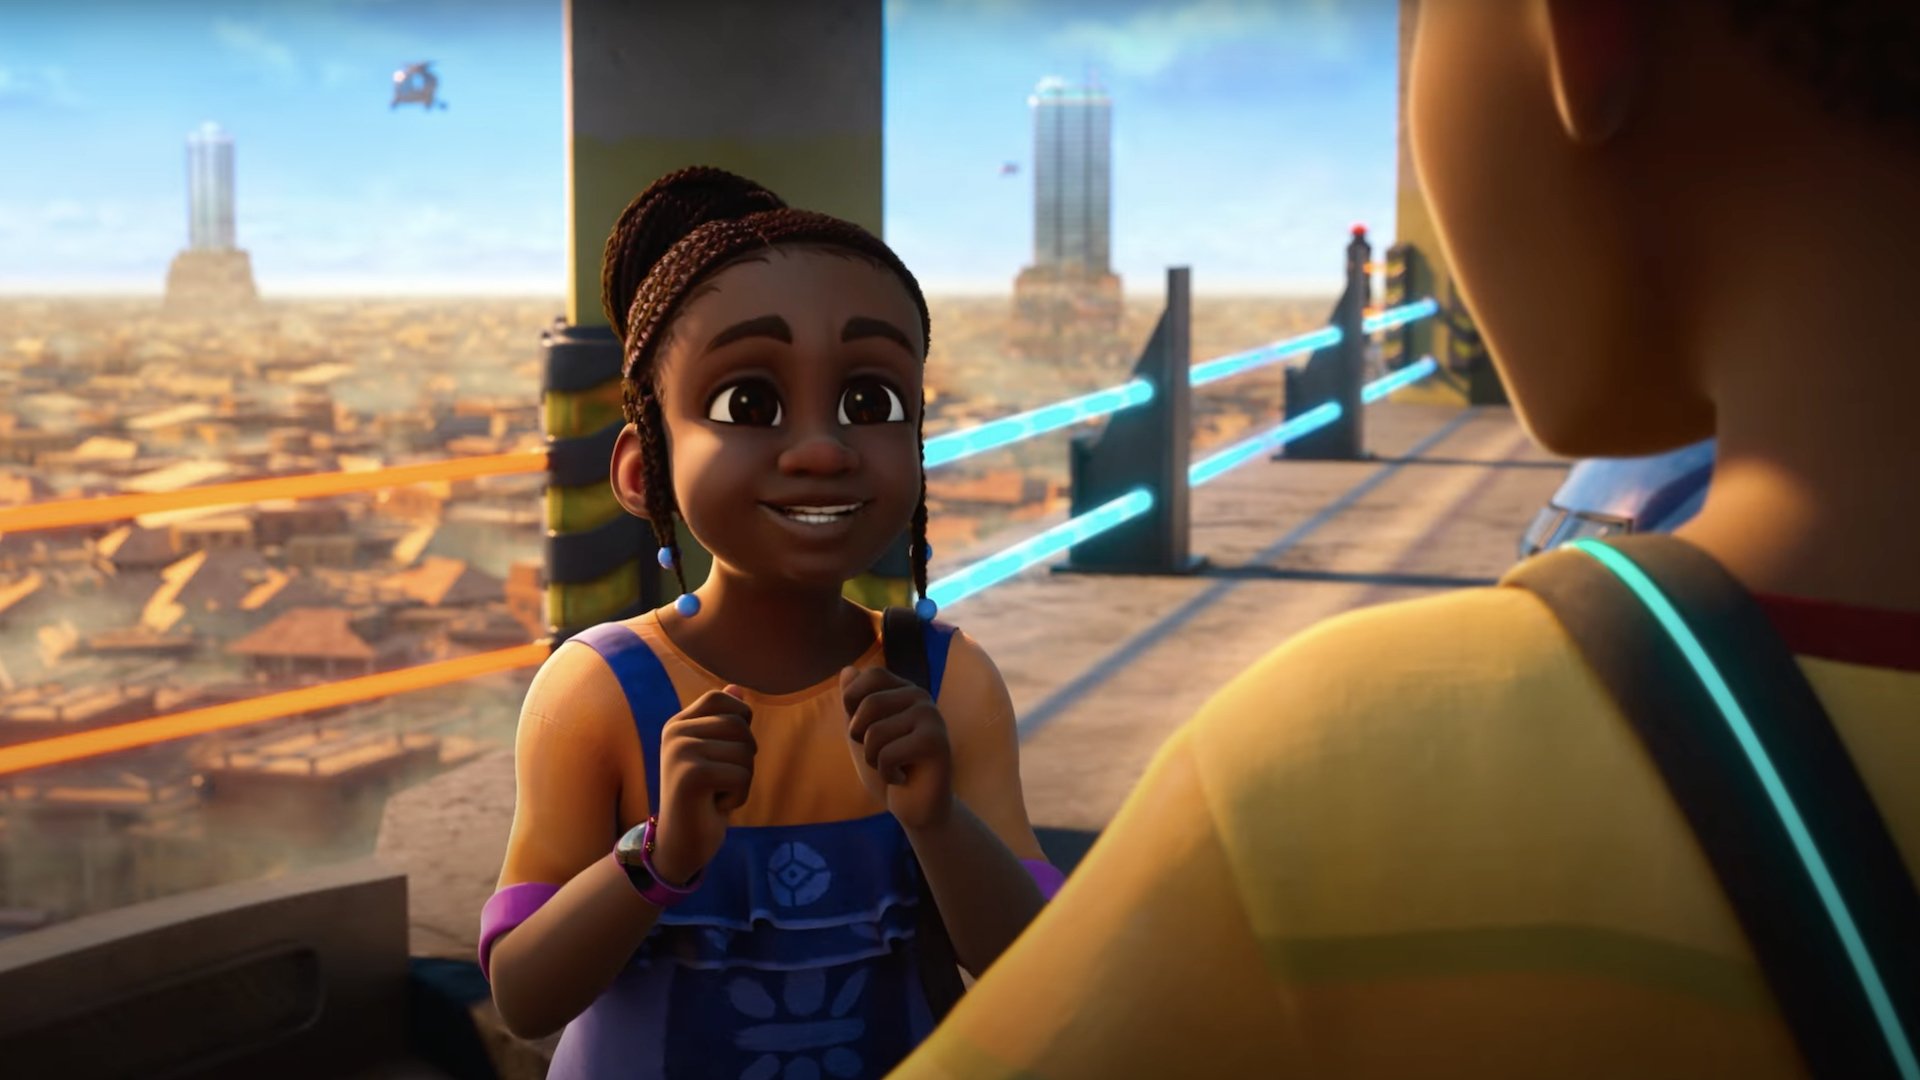 'Iwájú: A Day Ahead' trailer goes behind the scenes of the Disney series